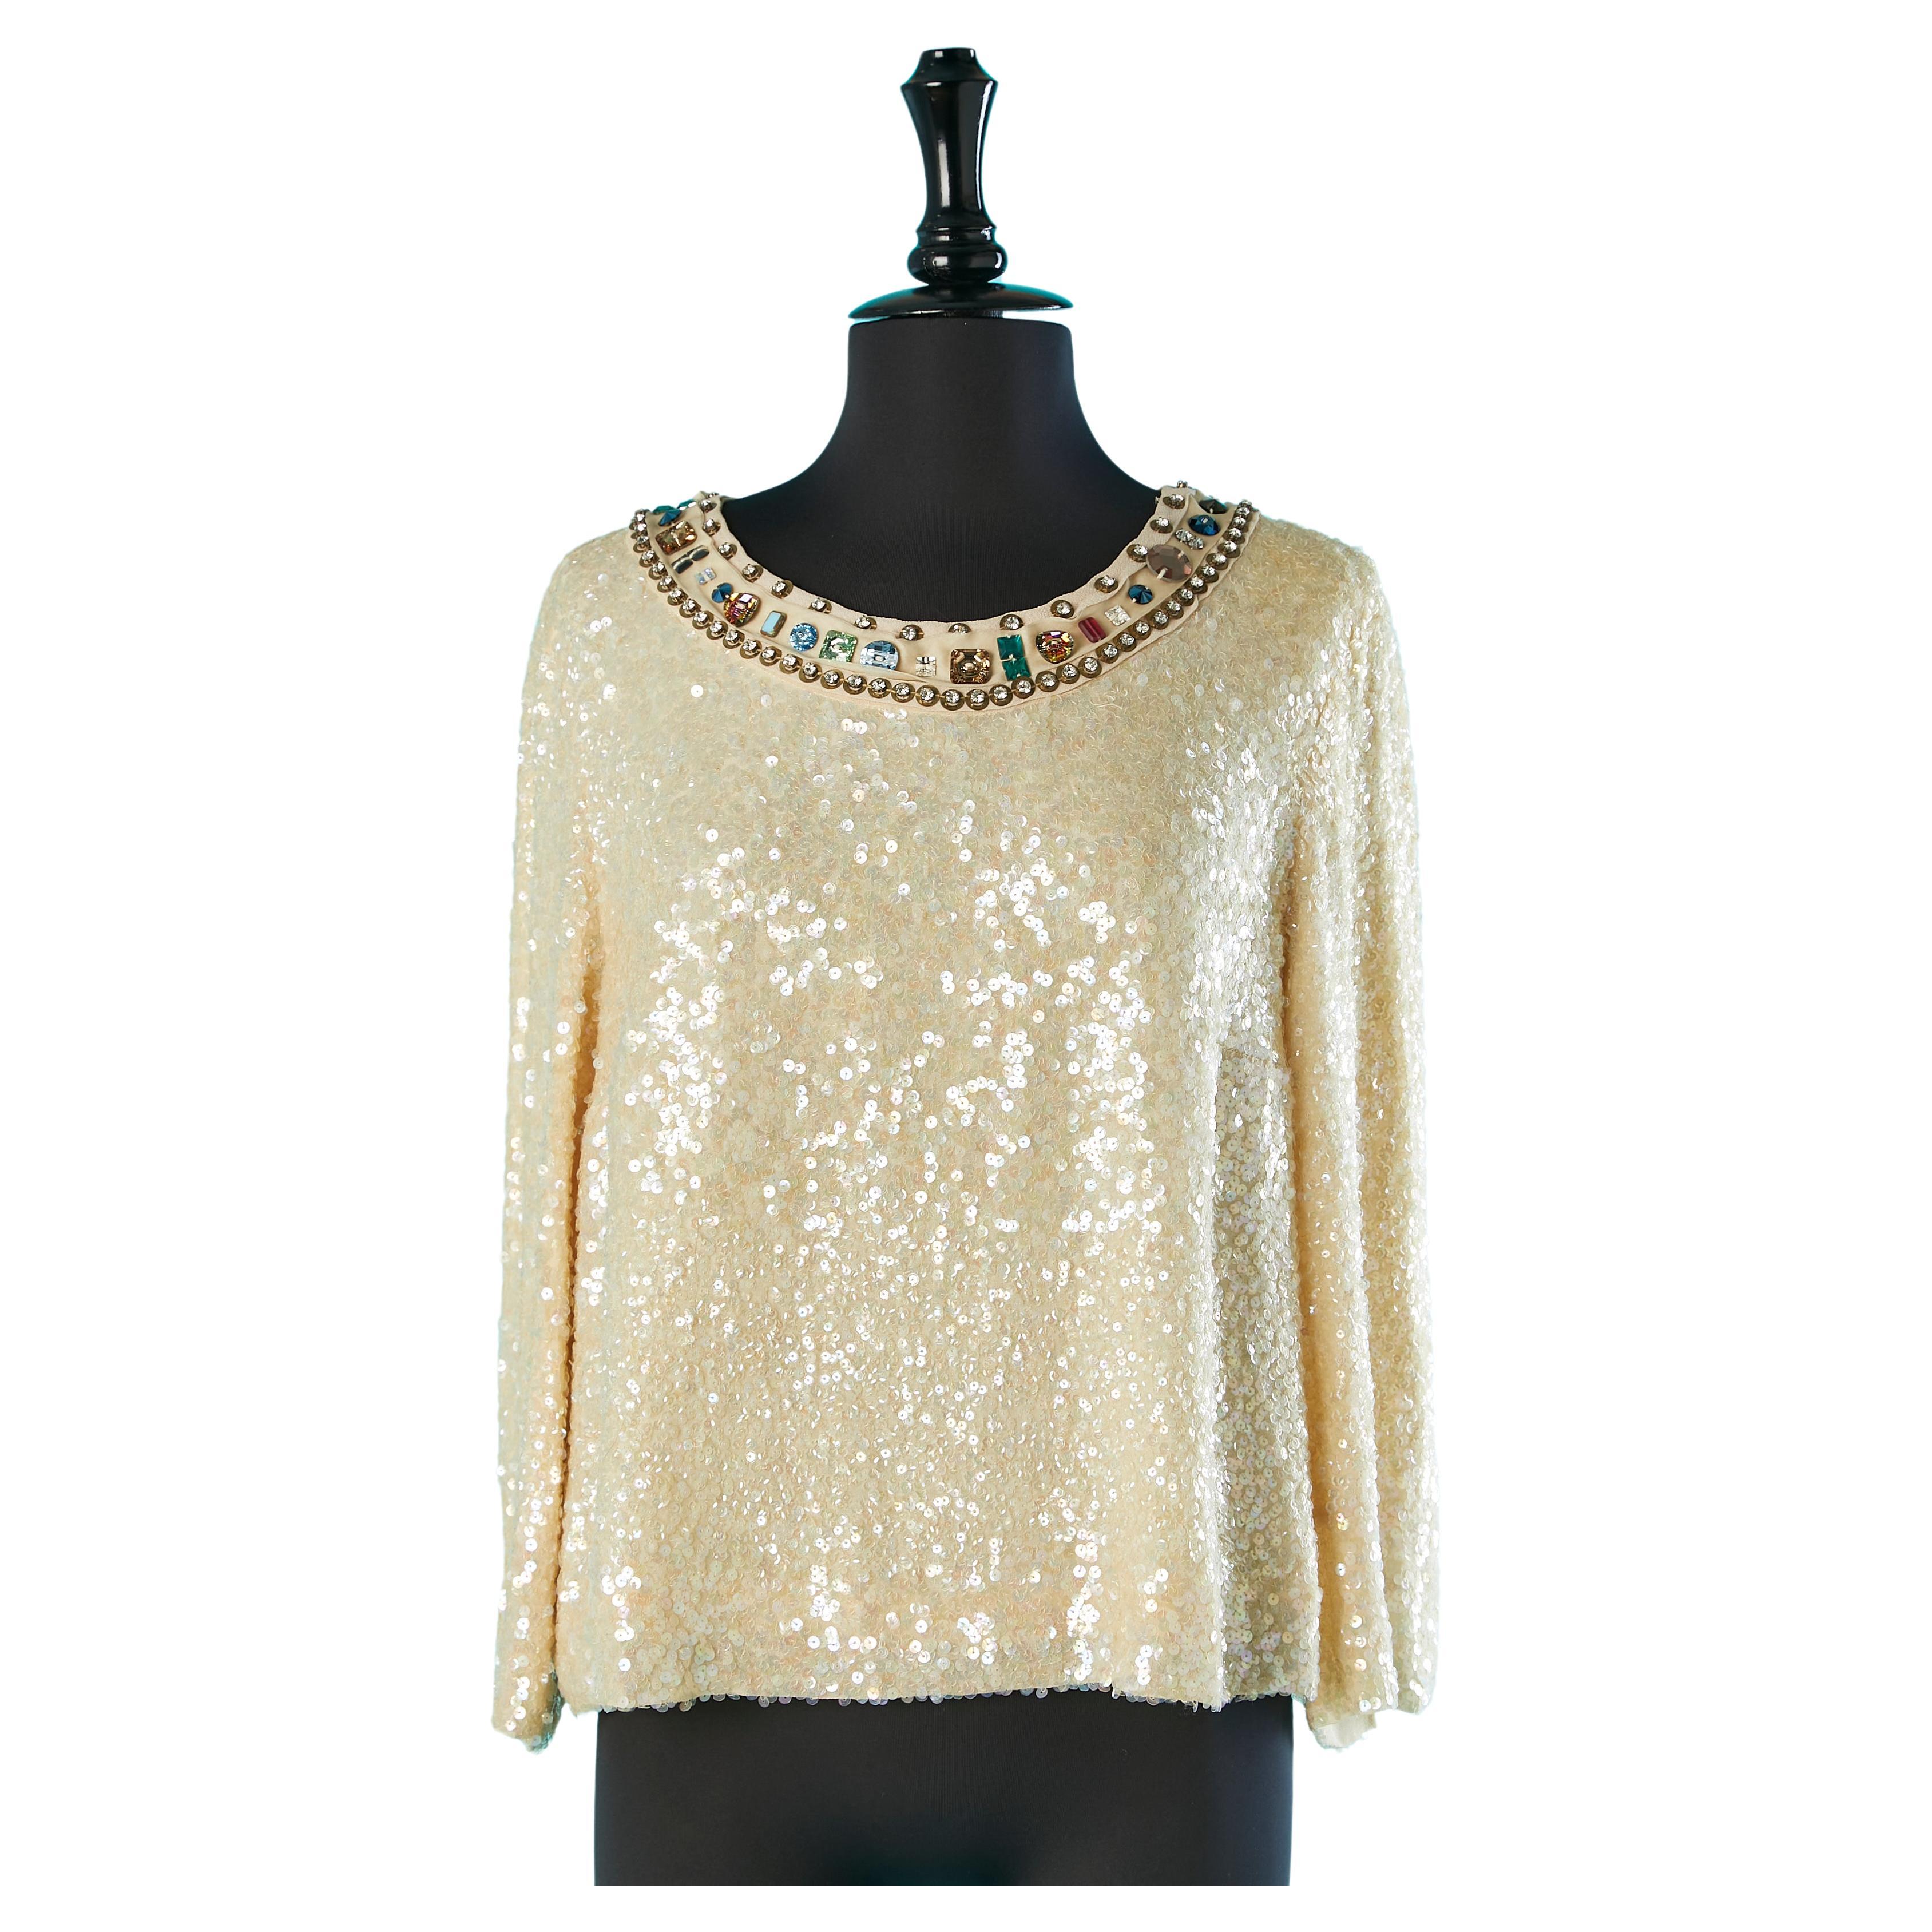 Sequins evening top with beads and rhinestone neckline Chloé 